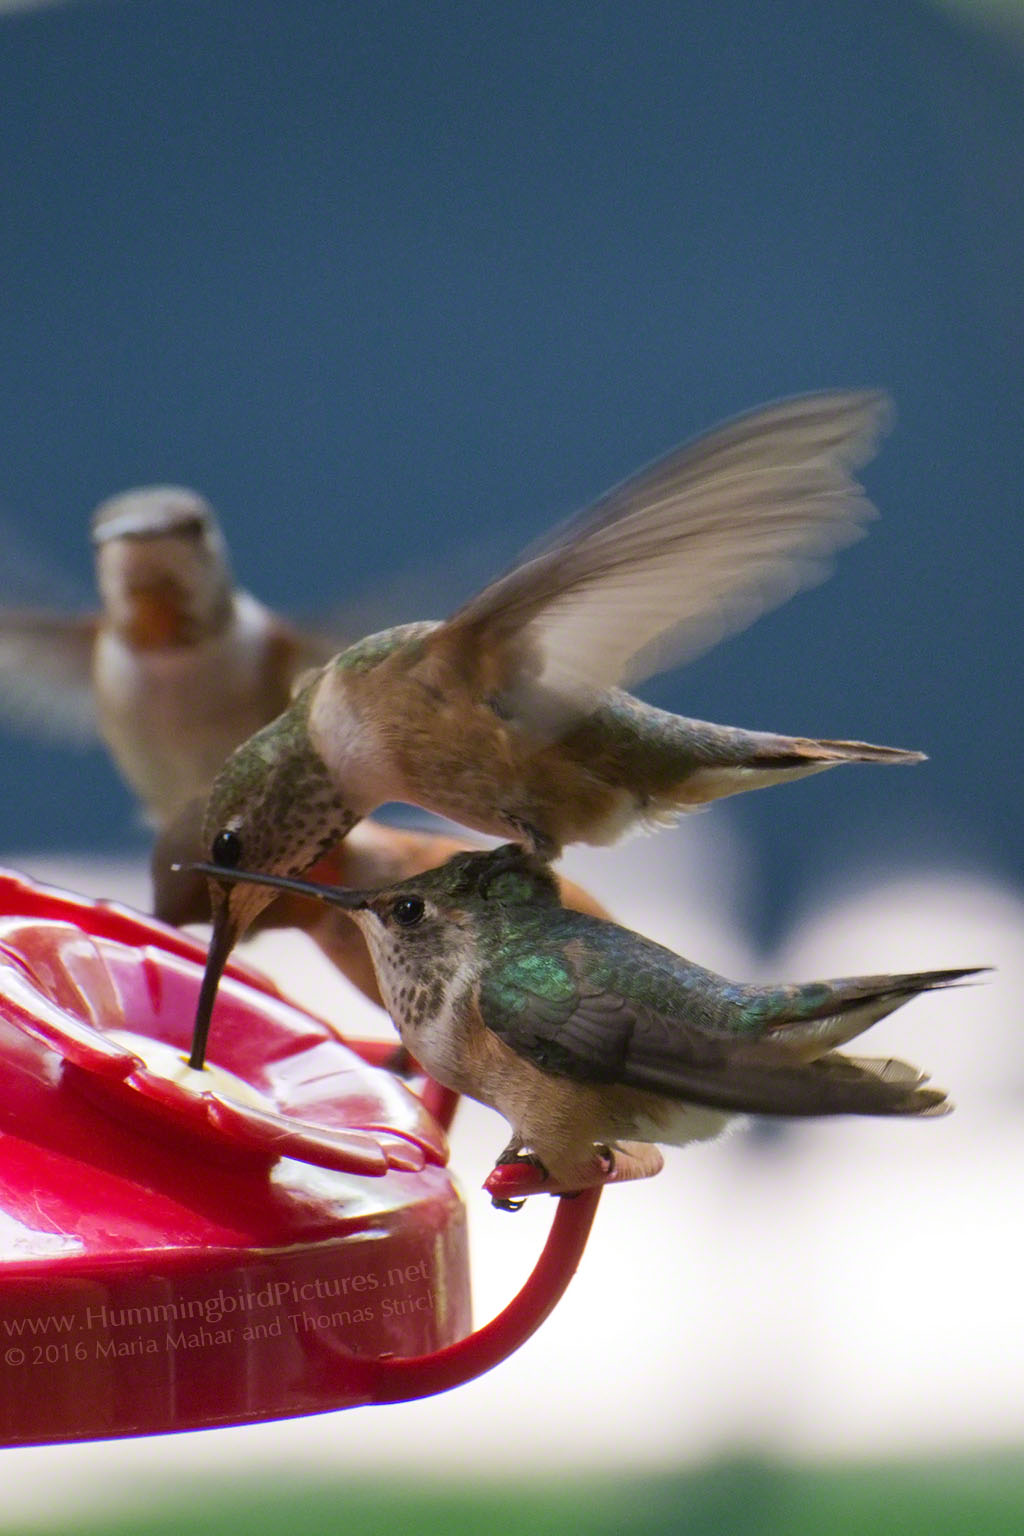 A perched hummingbird crouches while a hovering hummingbird balances on its head to reach the feeder